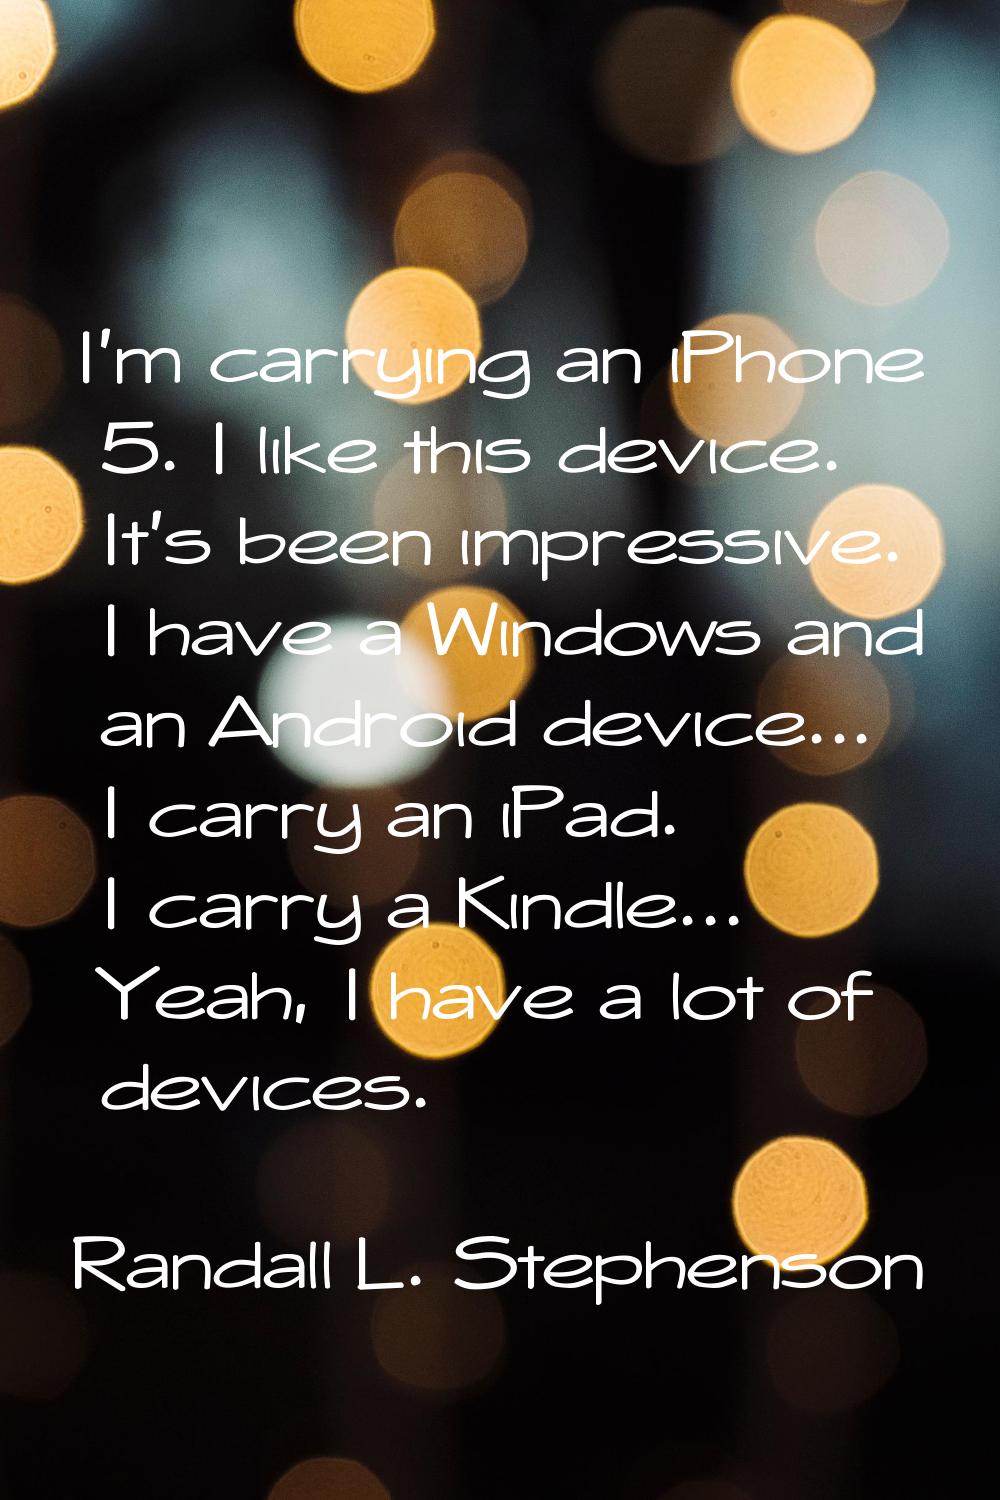 I'm carrying an iPhone 5. I like this device. It's been impressive. I have a Windows and an Android